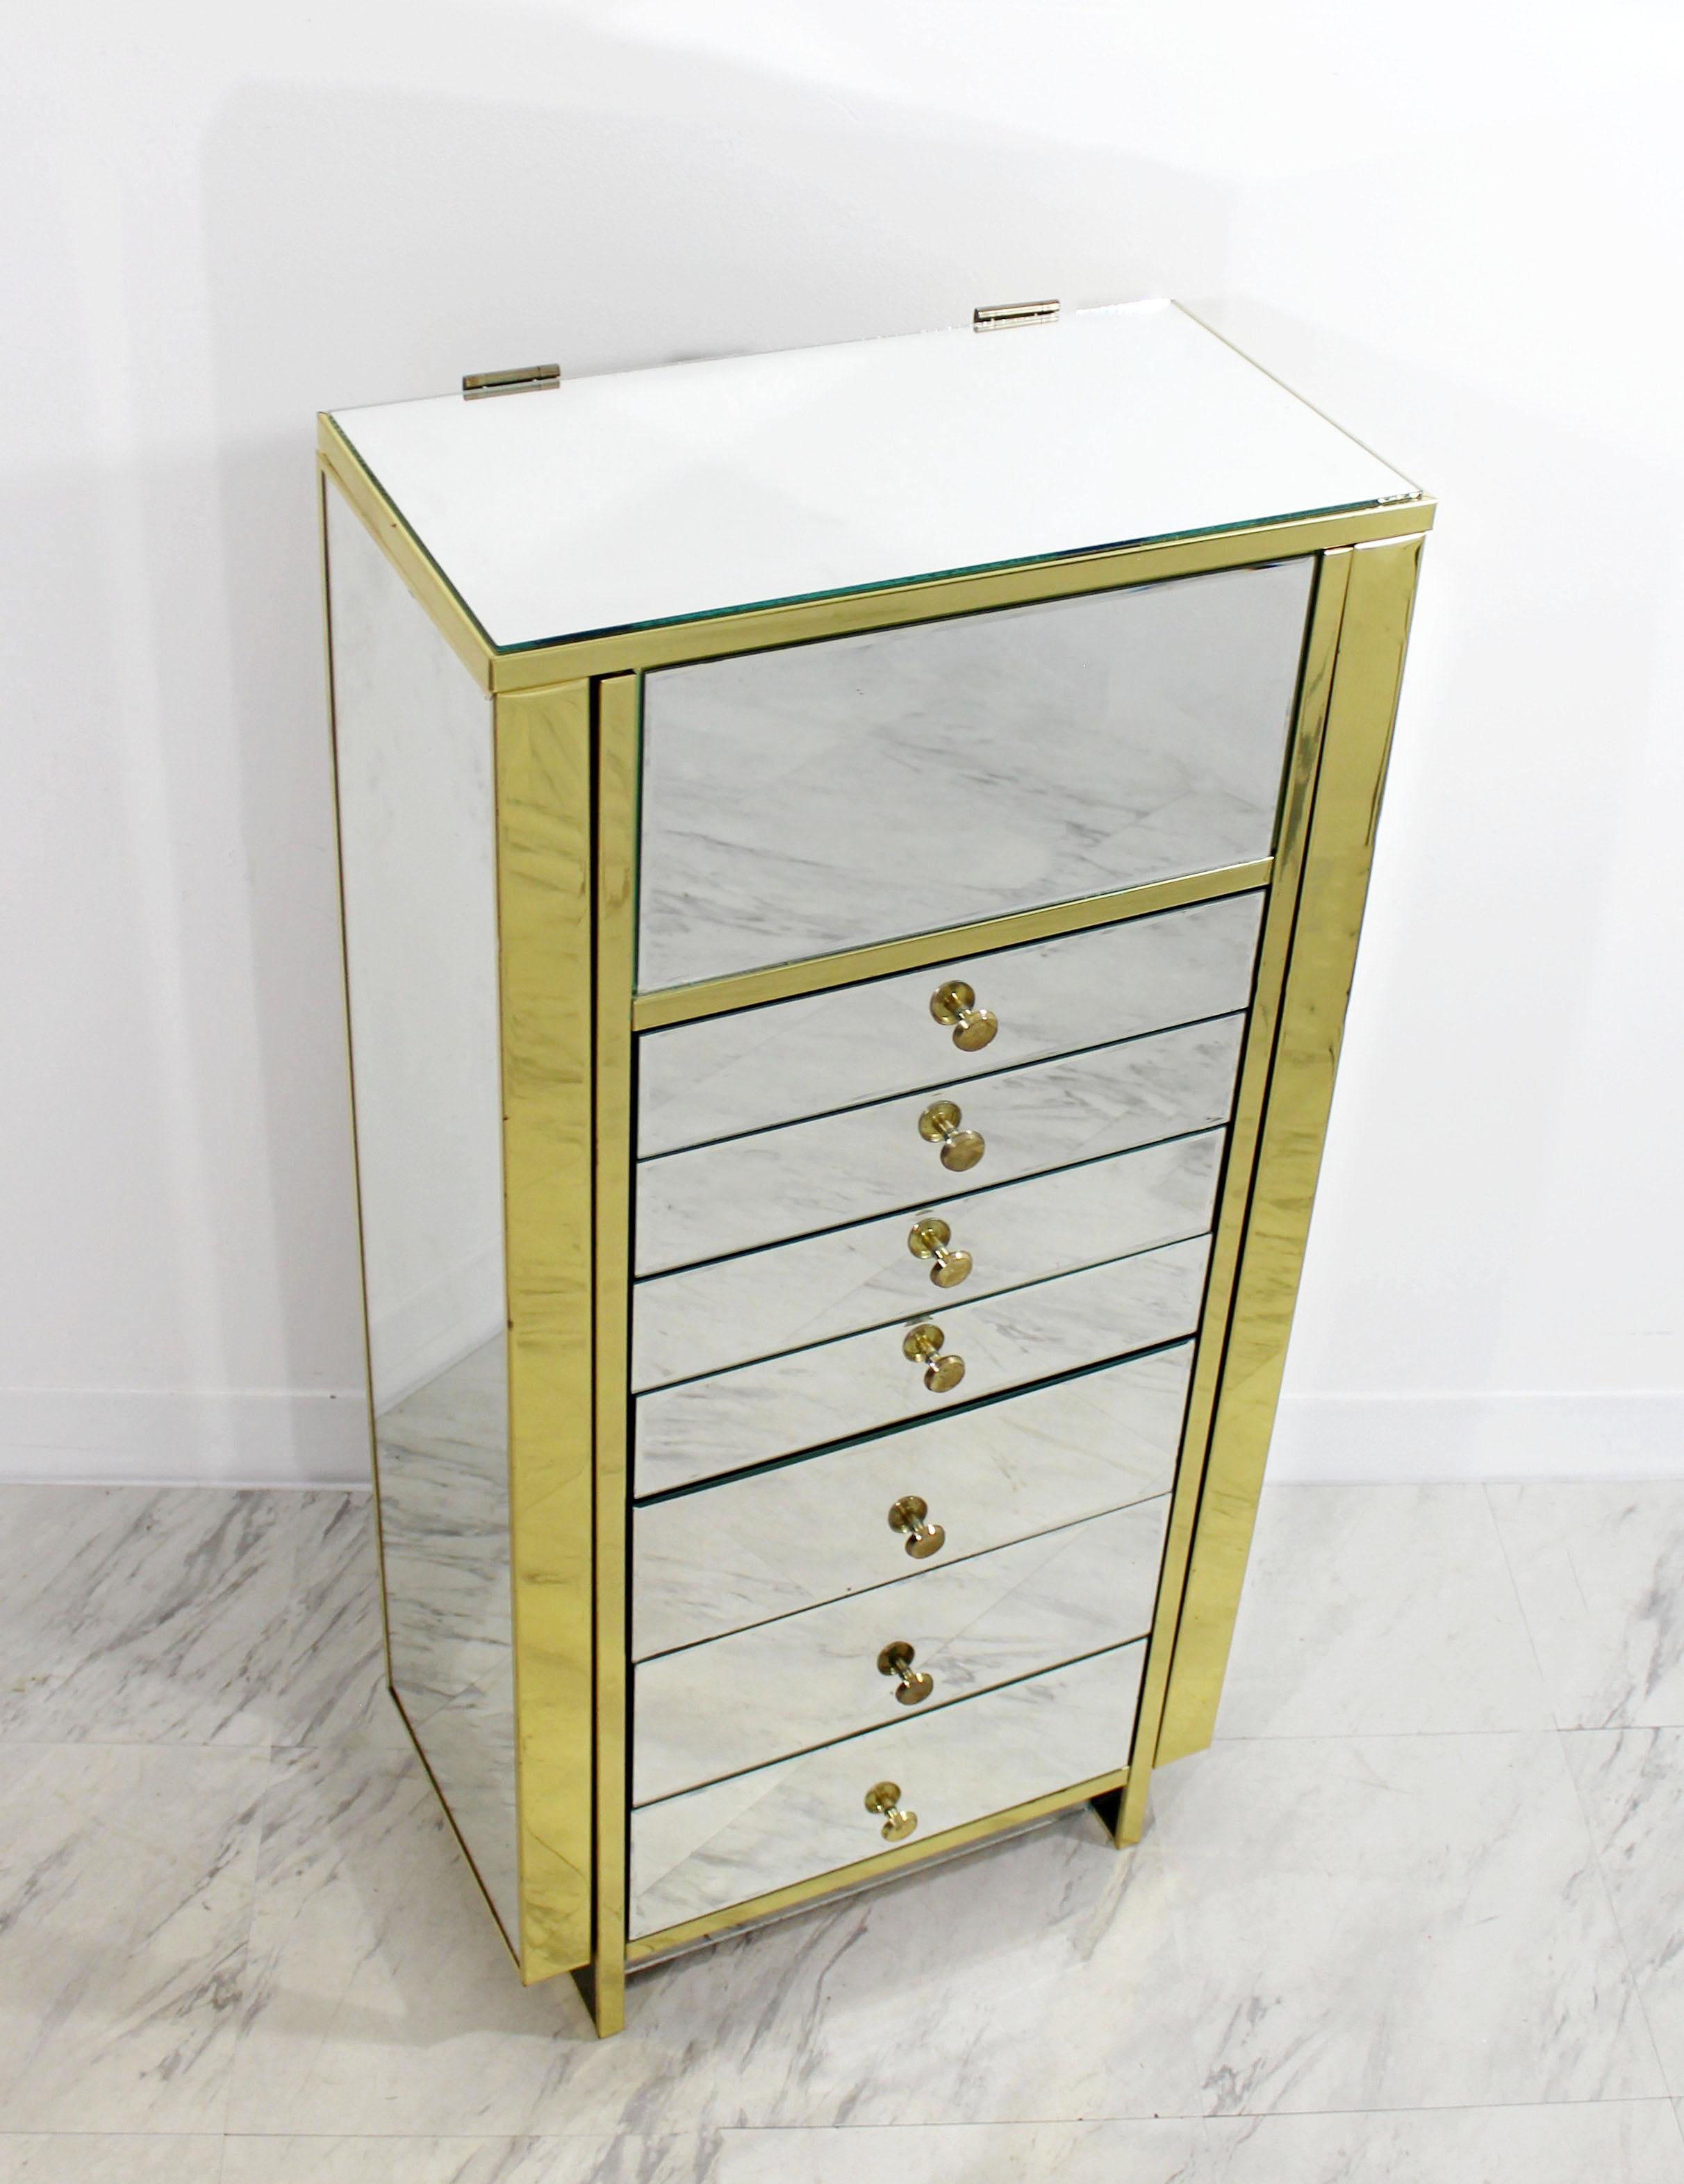 For your consideration is an absolutely fabulous, mirrored armoire or jewelry case, with brass borders and pulls, circa 1970s. In excellent condition, with just a couple nicks in the mirror. The dimensions are 19.5